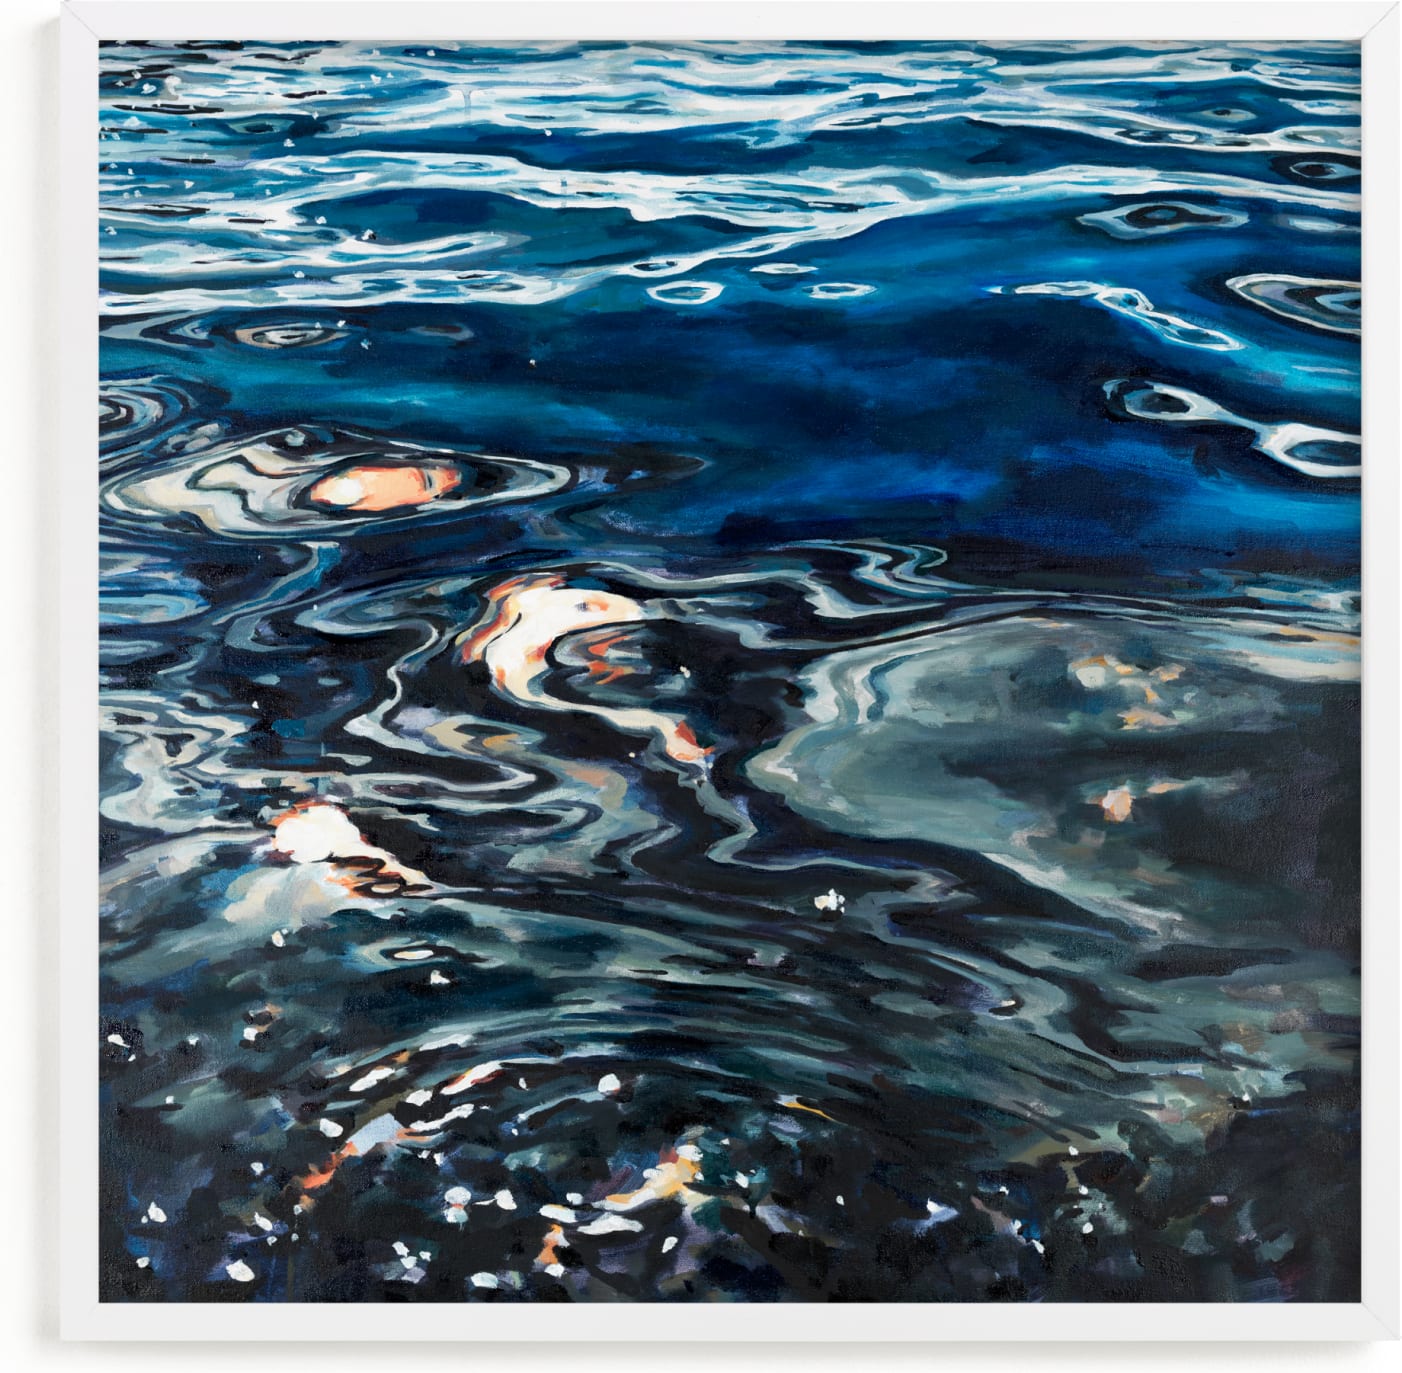 This is a blue art by Kelly Johnston called Silver Sea.